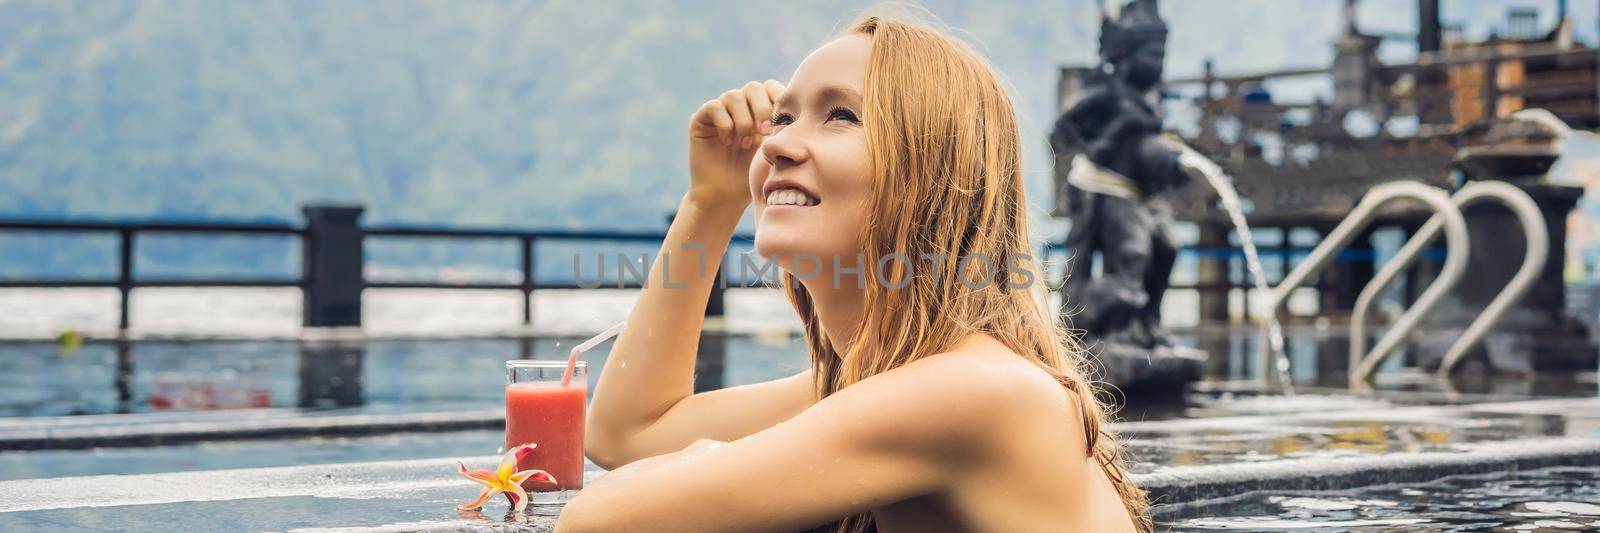 Geothermal spa. Woman relaxing in hot spring pool against the lake. hot springs concept. Drinking guava juice. BANNER, LONG FORMAT